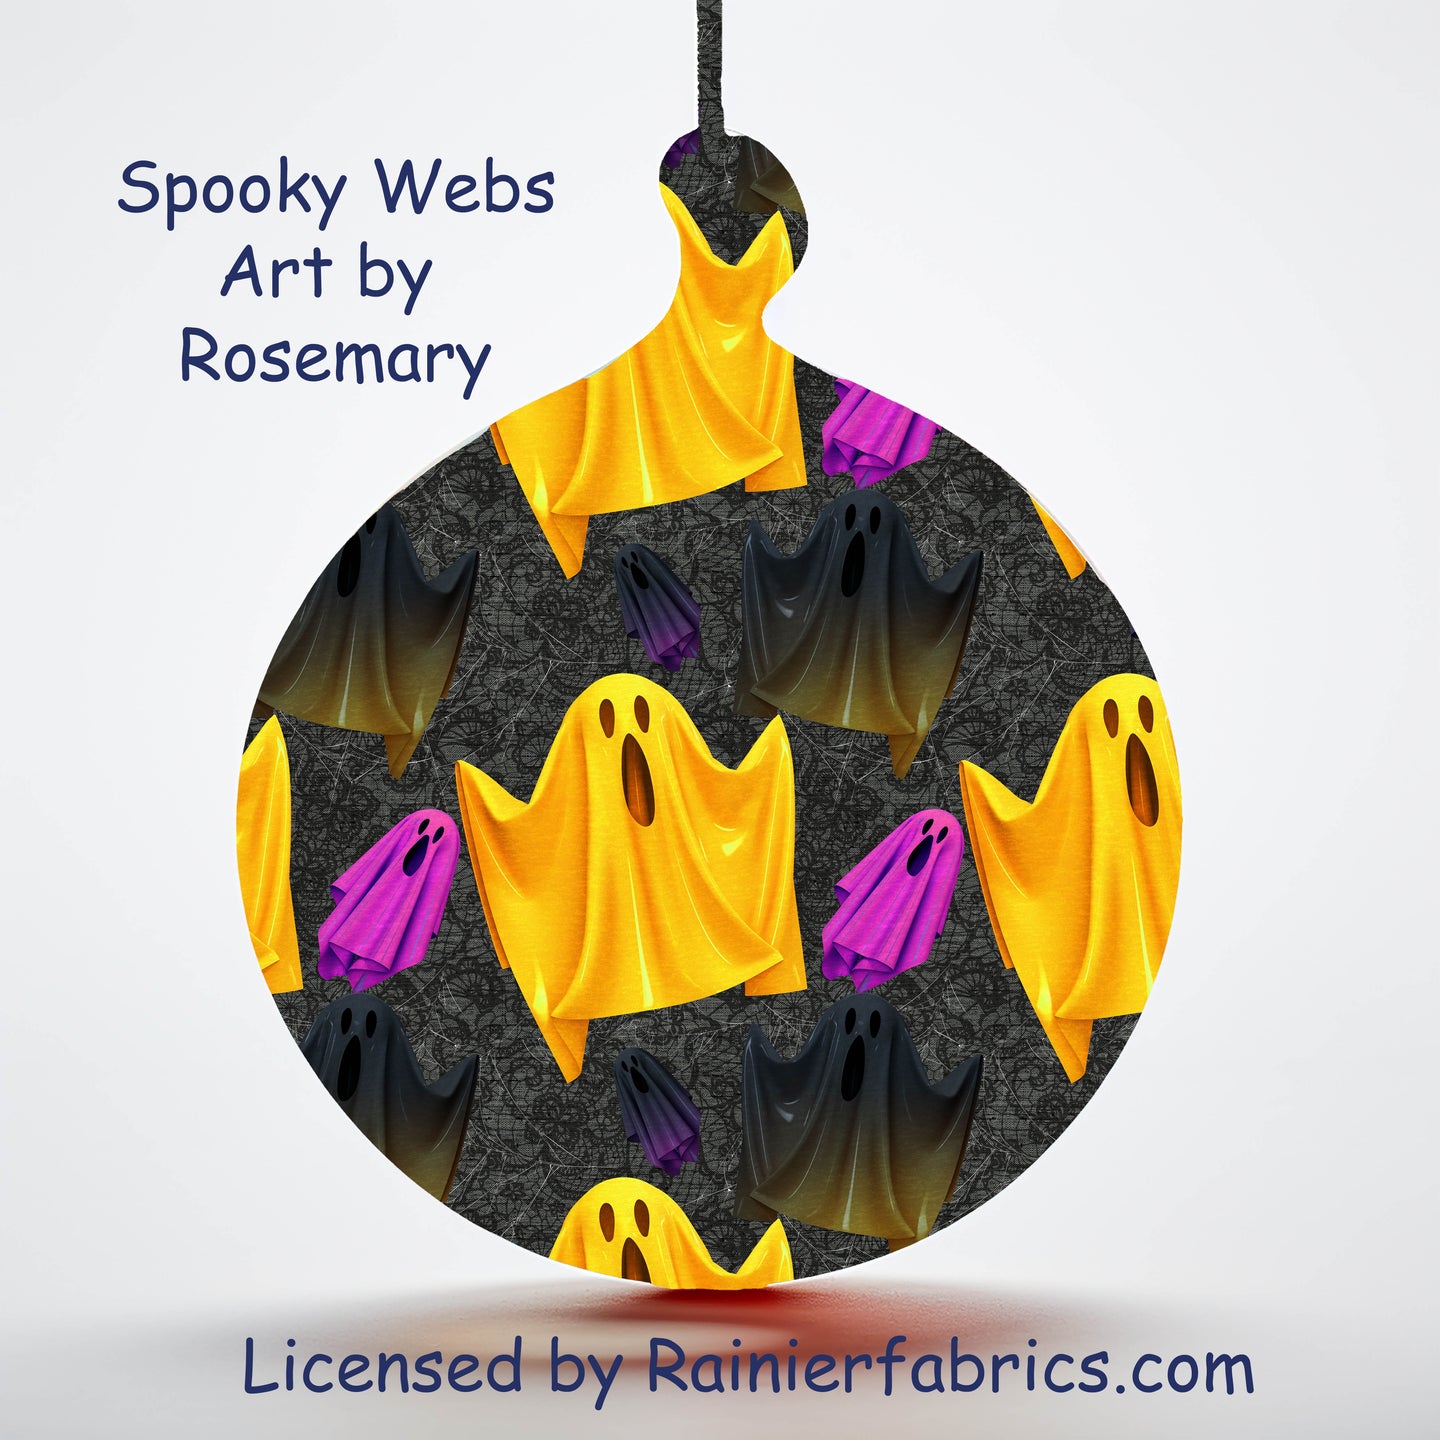 Spooky Webs by Rosemary